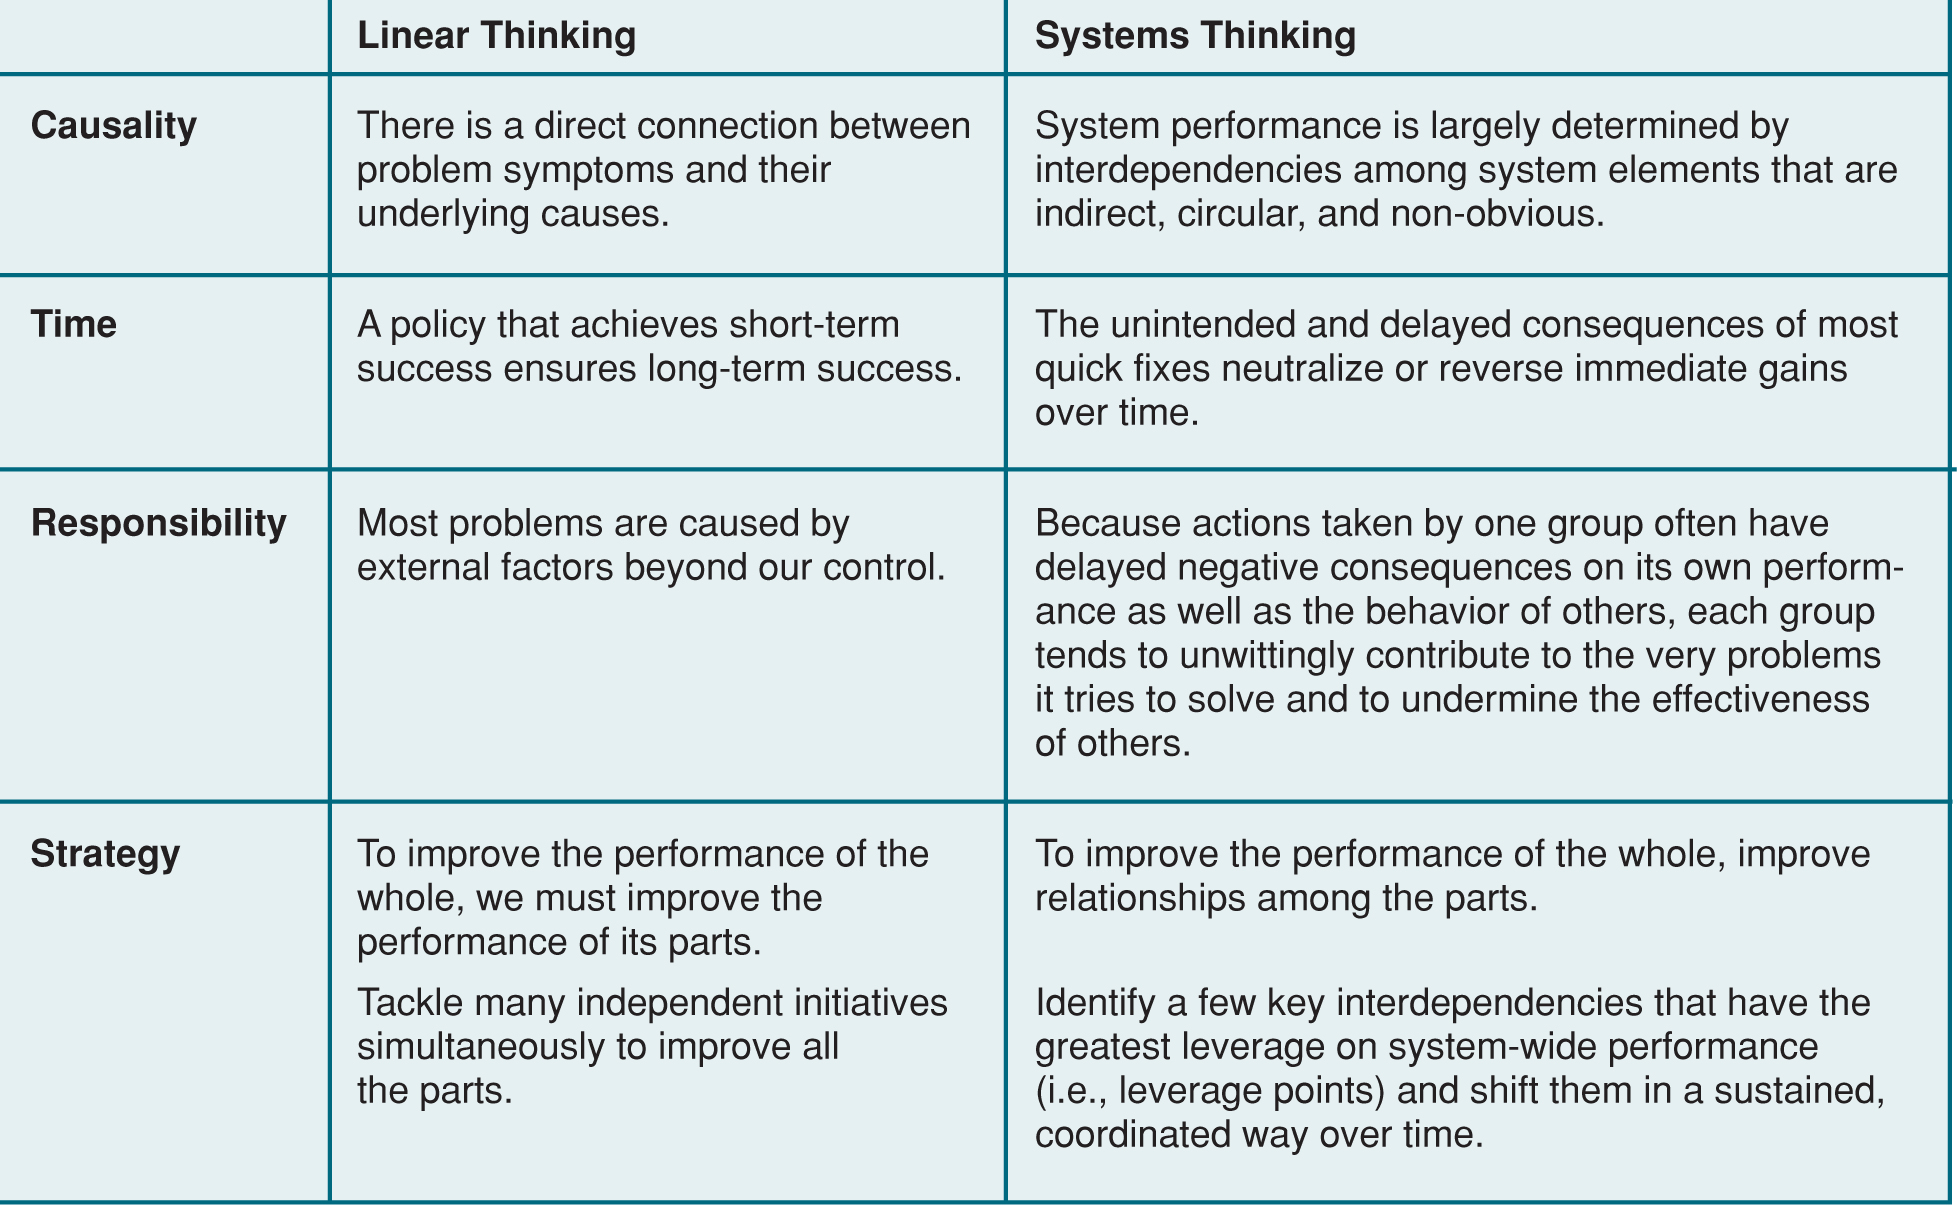 DISTINGUISHING LINEAR THINKING FROM SYSTEMS THINKING